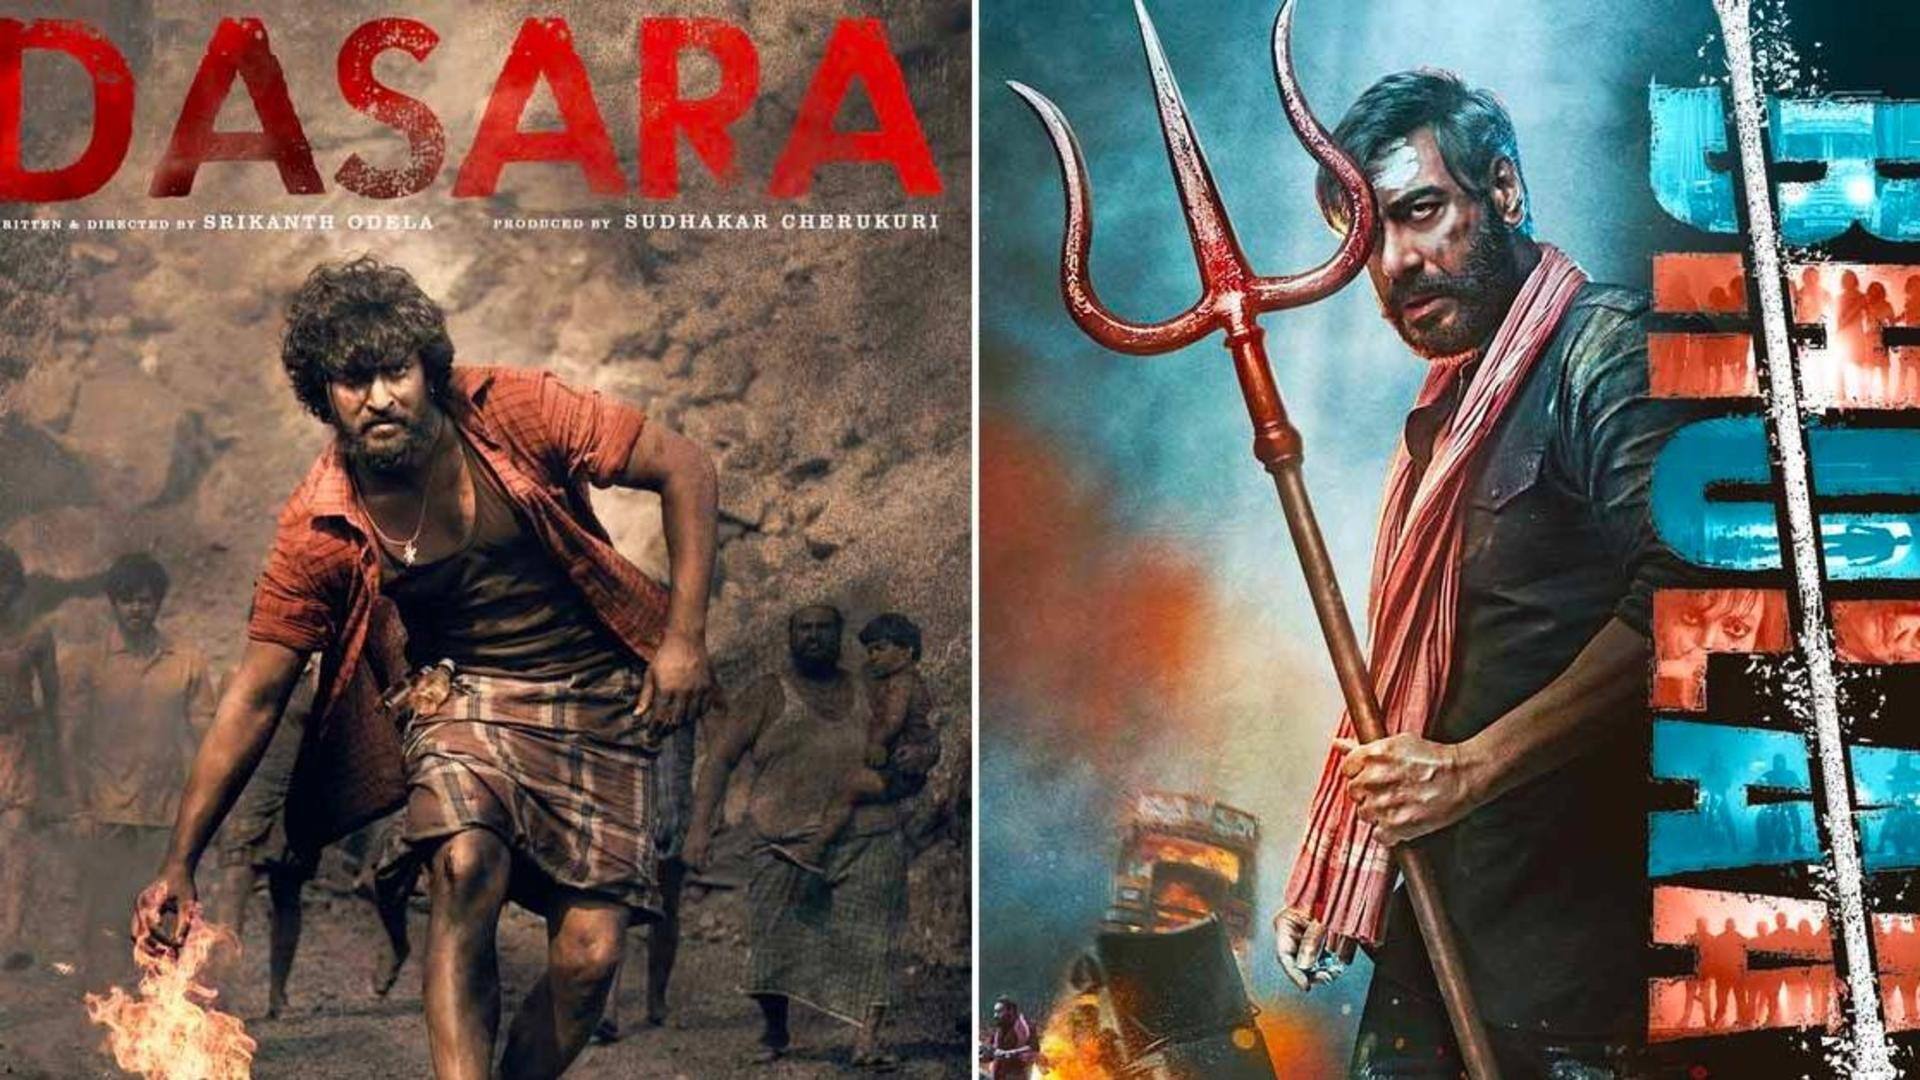 'Bholaa' versus 'Dasara': Nani's action-thriller marches ahead of Ajay's actioner